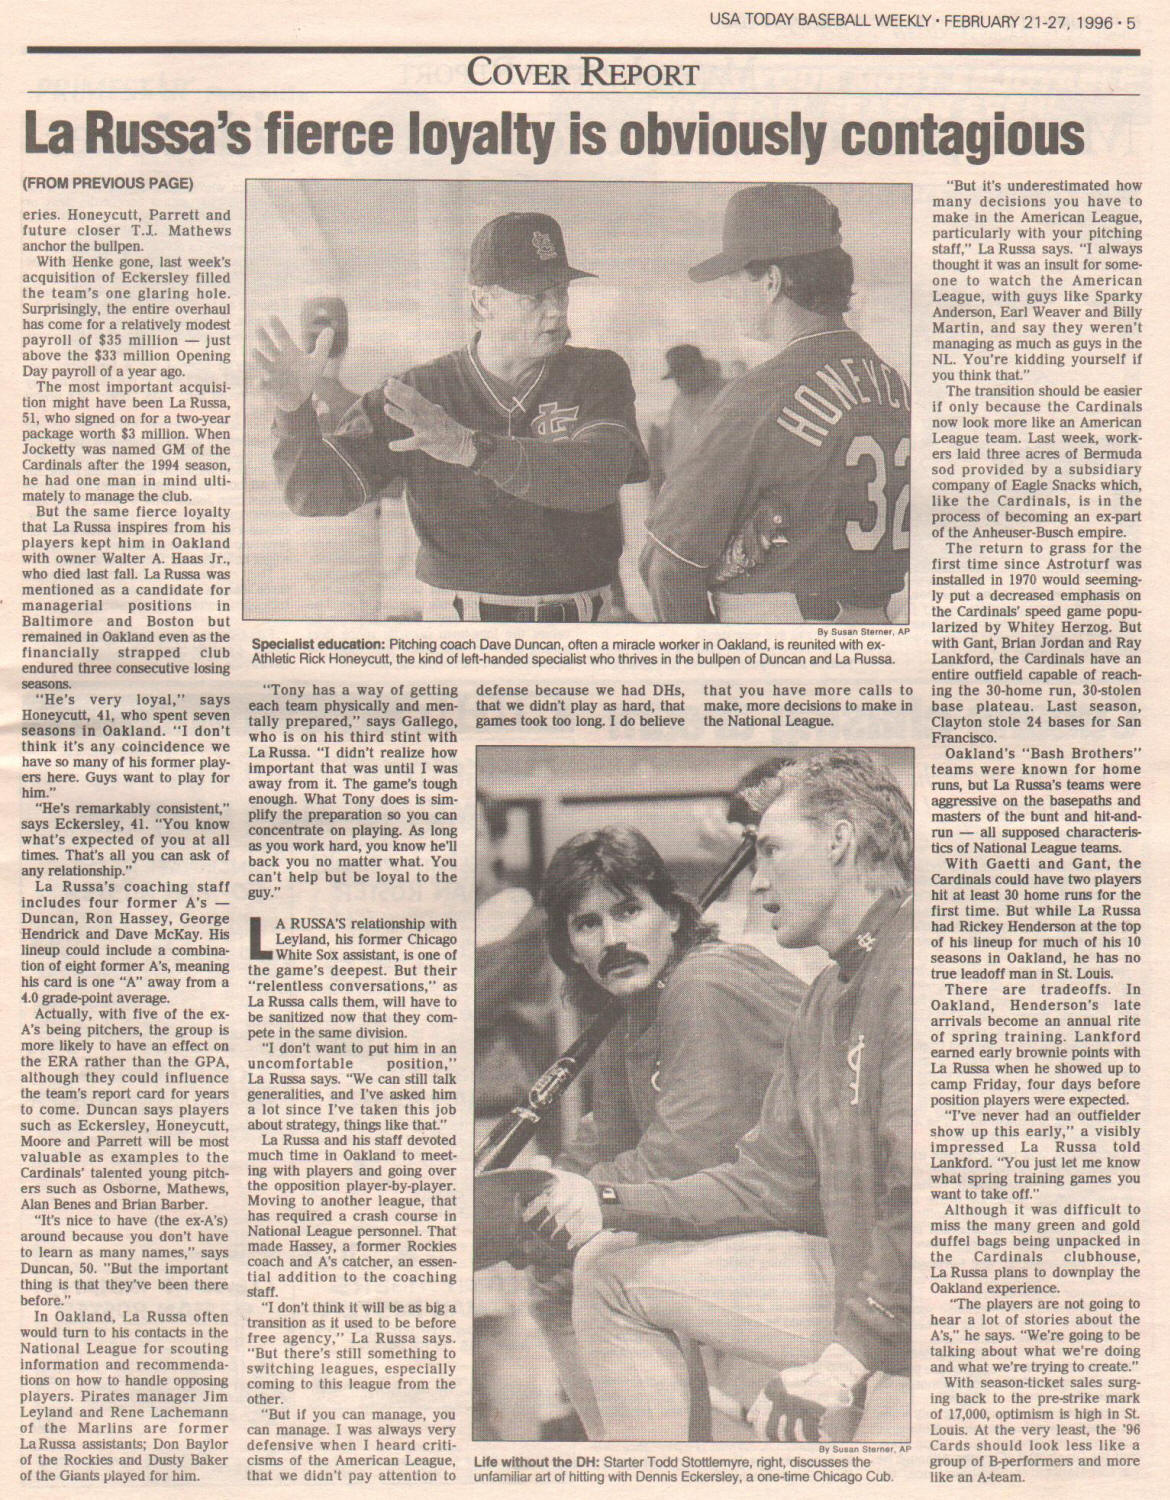 1996 - USA Today Baseball Weekly - Spring Training Preview